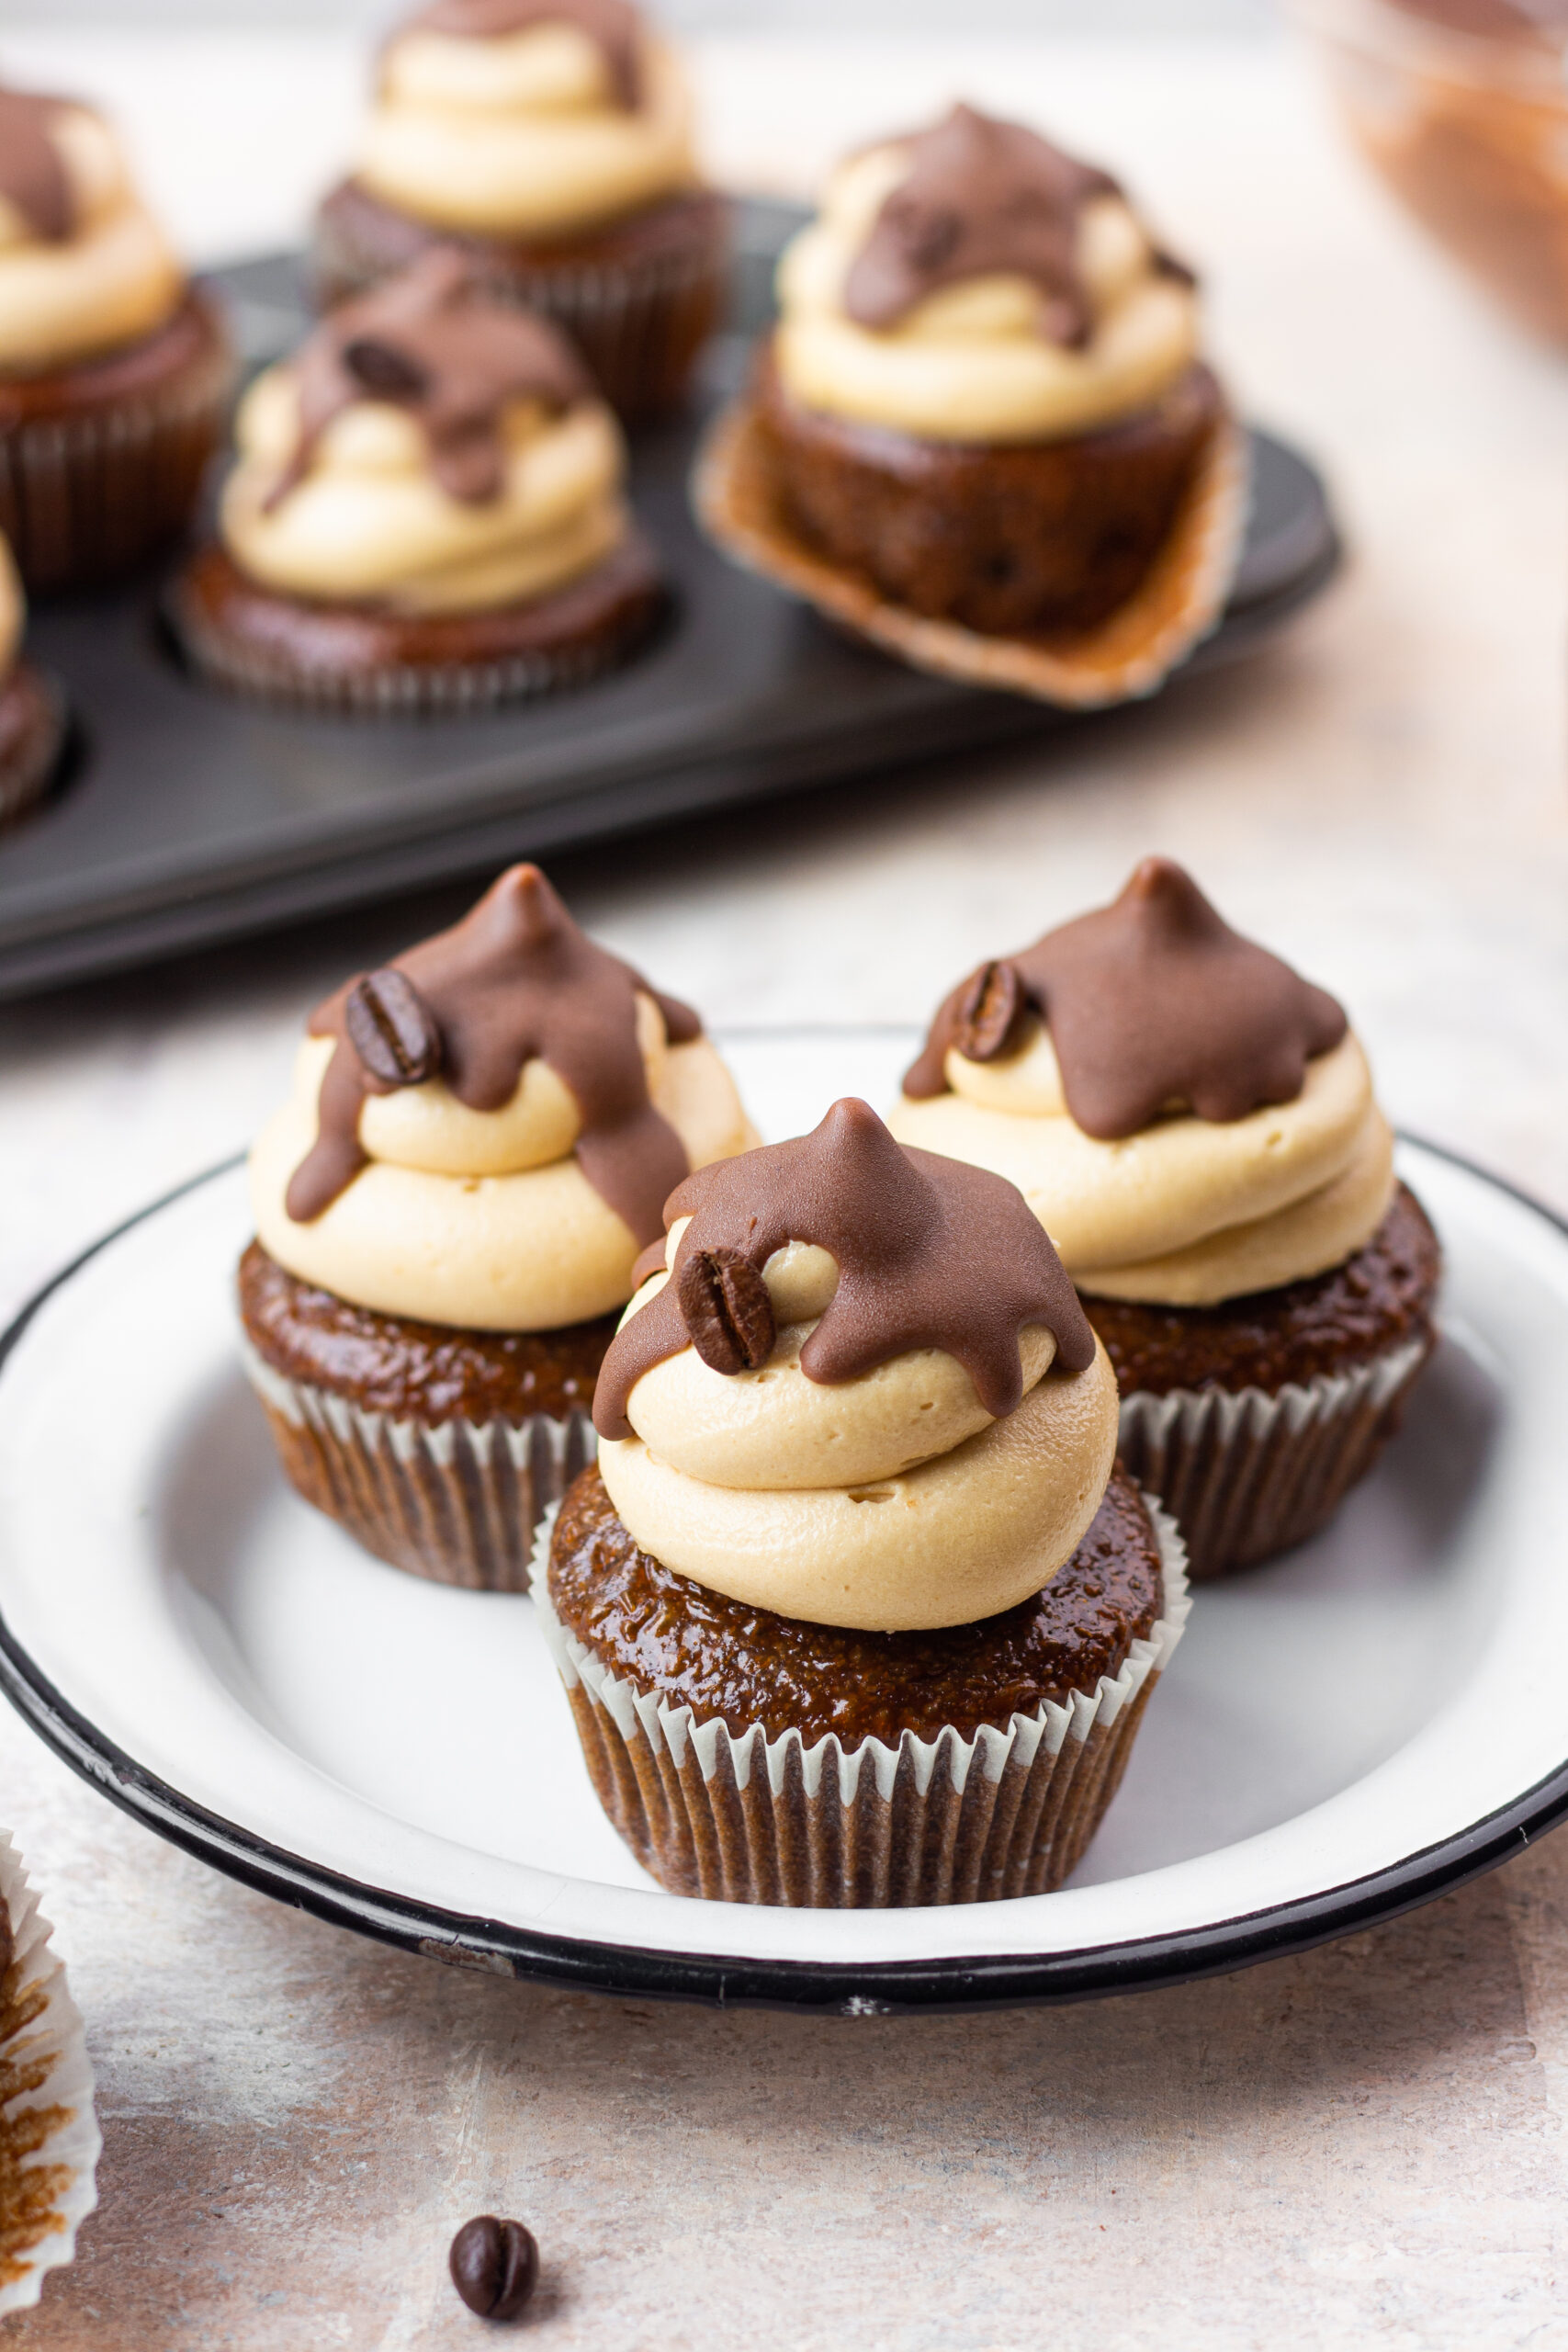 https://bakewithshivesh.com/wp-content/uploads/2023/05/Cold-coffee-cupcakes-scaled.jpg